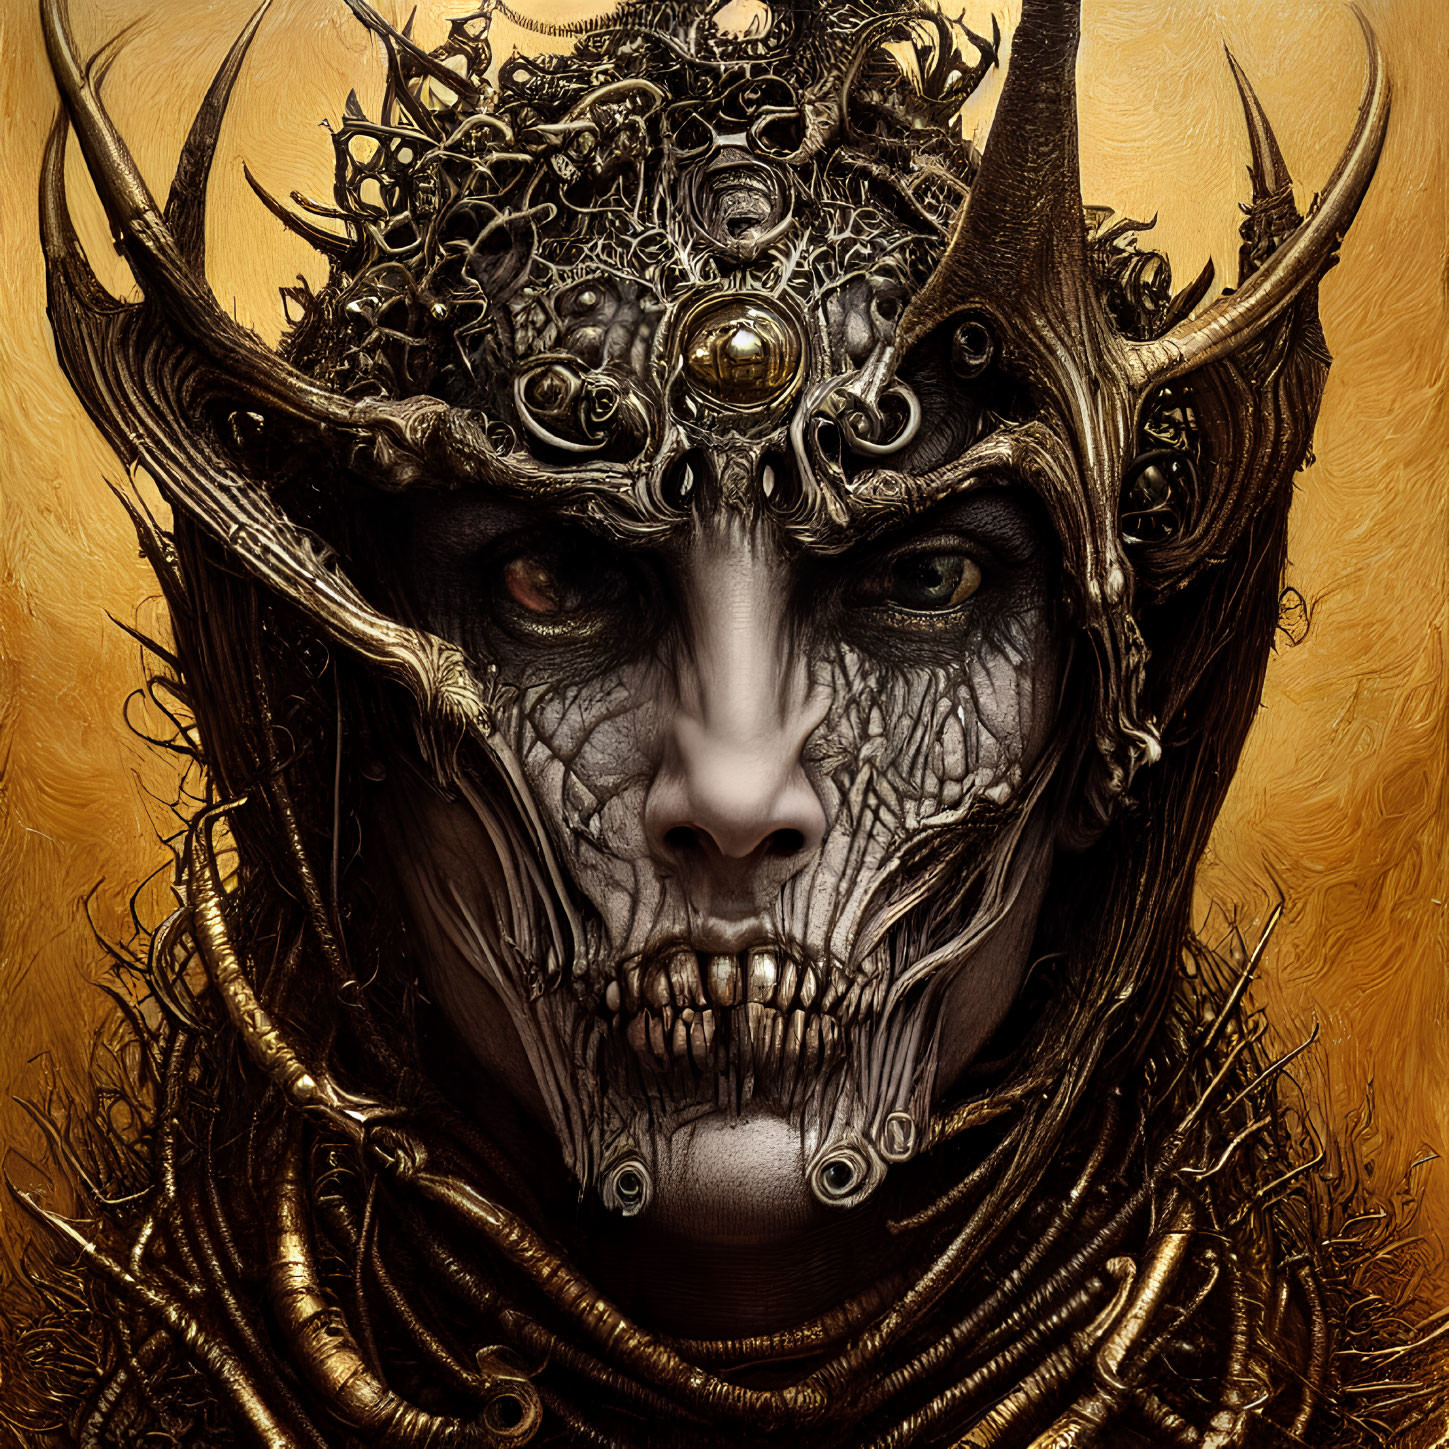 Intricate dark crown with golden accents on person against golden backdrop